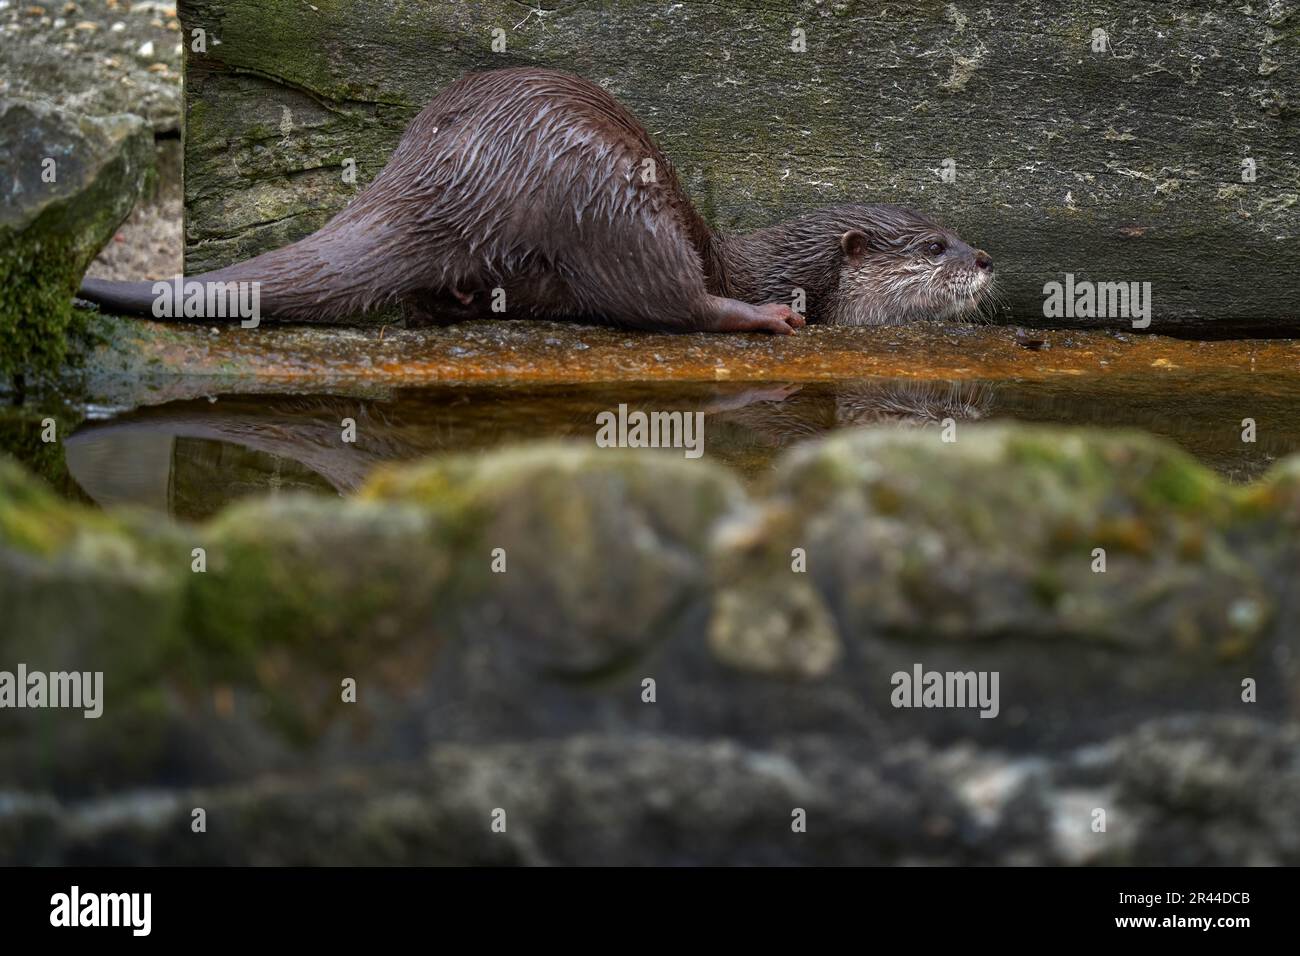 Oriental small-clawed otter, Aonyx cinereus, water mammal in the water, Kalkata, India. Urban wildlife in the town. Nature wildlife. Otter in the wate Stock Photo